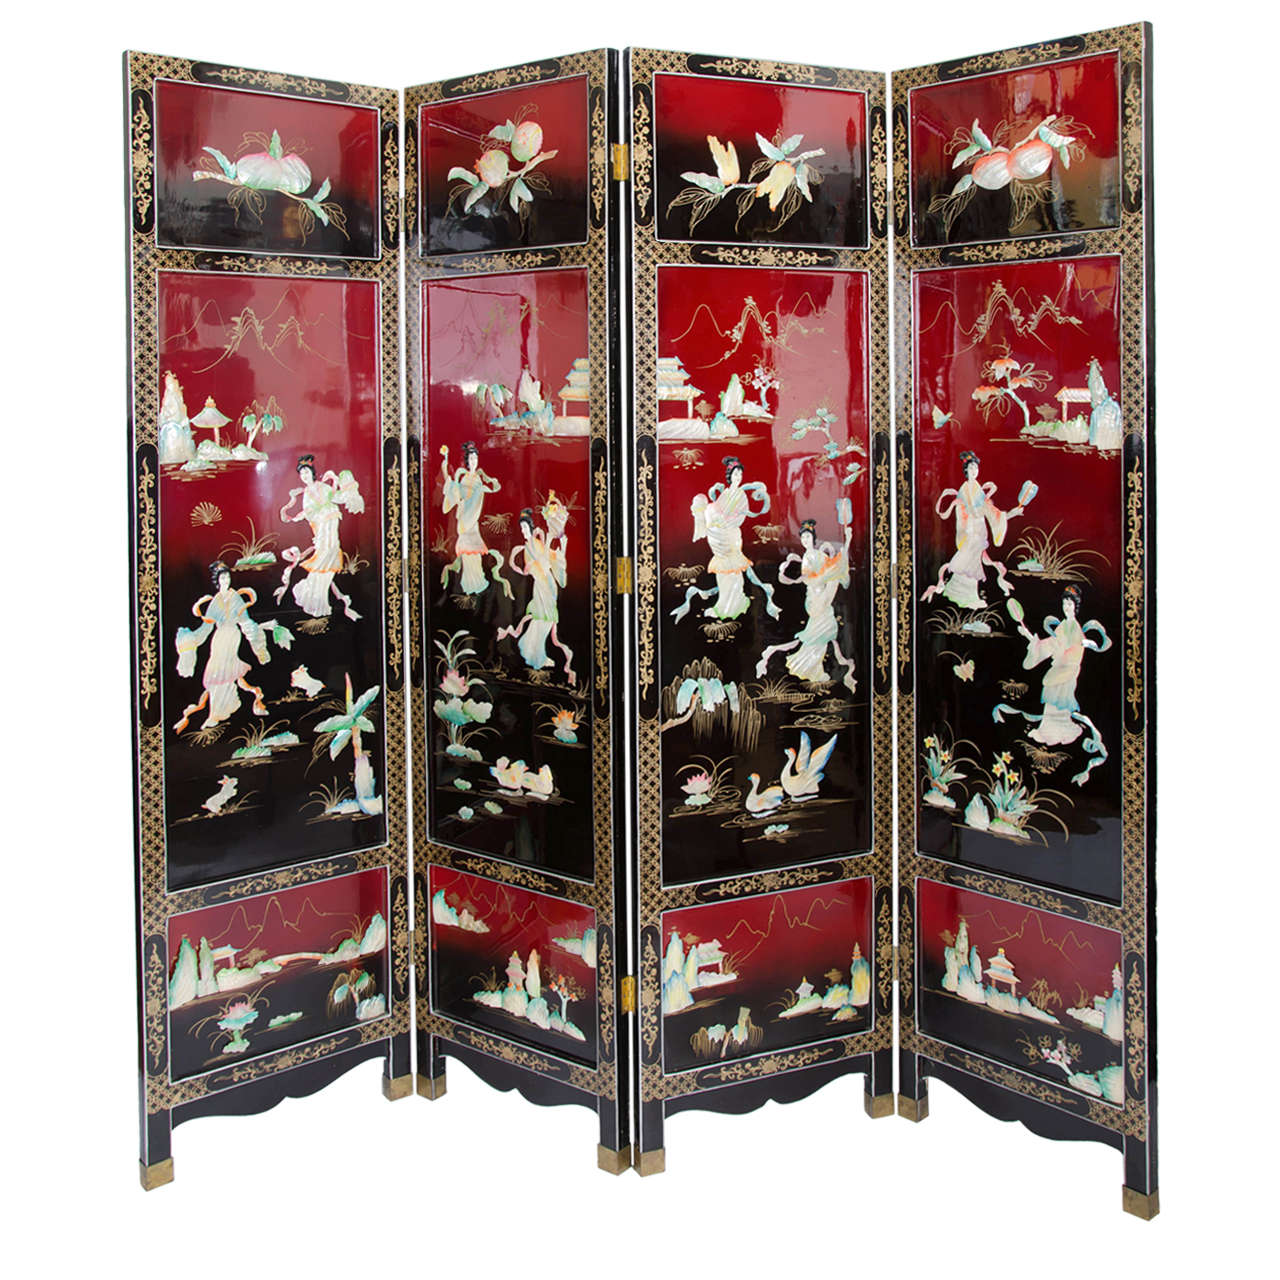 Vintage Chinoiserie Lacquered Coromandel Screen Room Divider